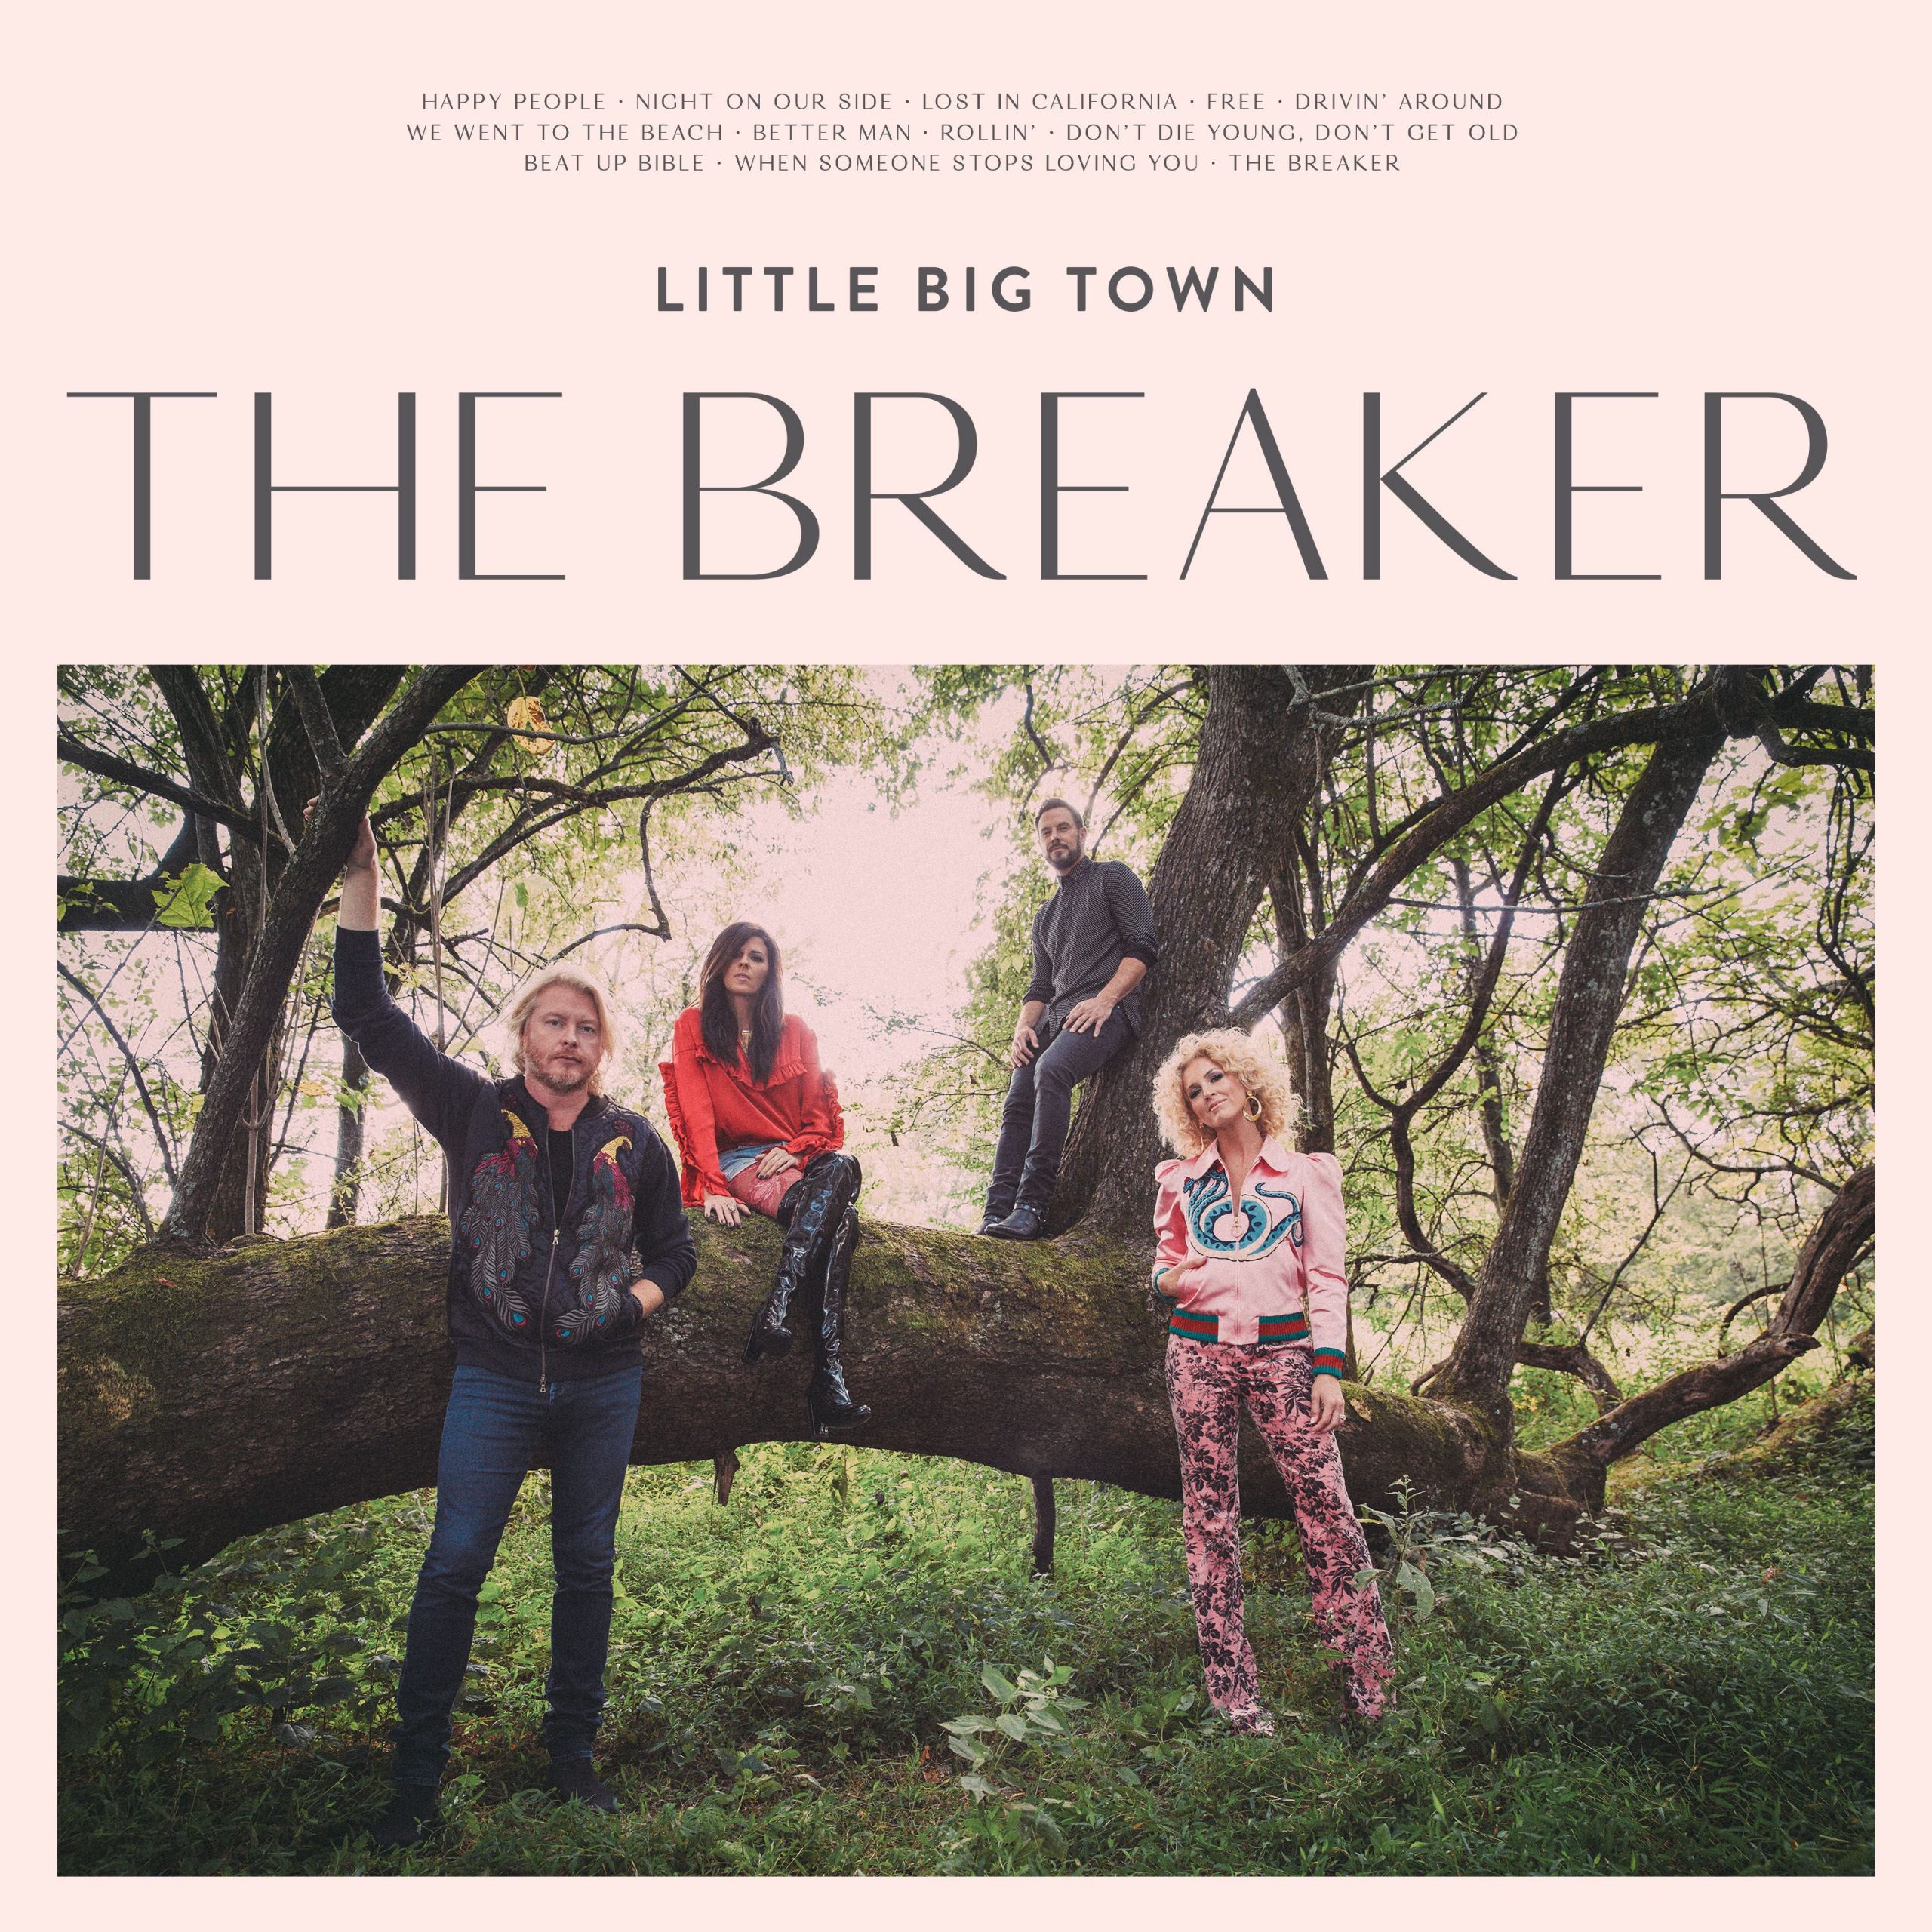 LITTLE BIG TOWN’S CRITICALLY-ACCLAIMED ALBUM, THE BREAKER, DEBUTS No. 1 BILLBOARD COUNTRY AND TOP 5 BILLBOARD 200